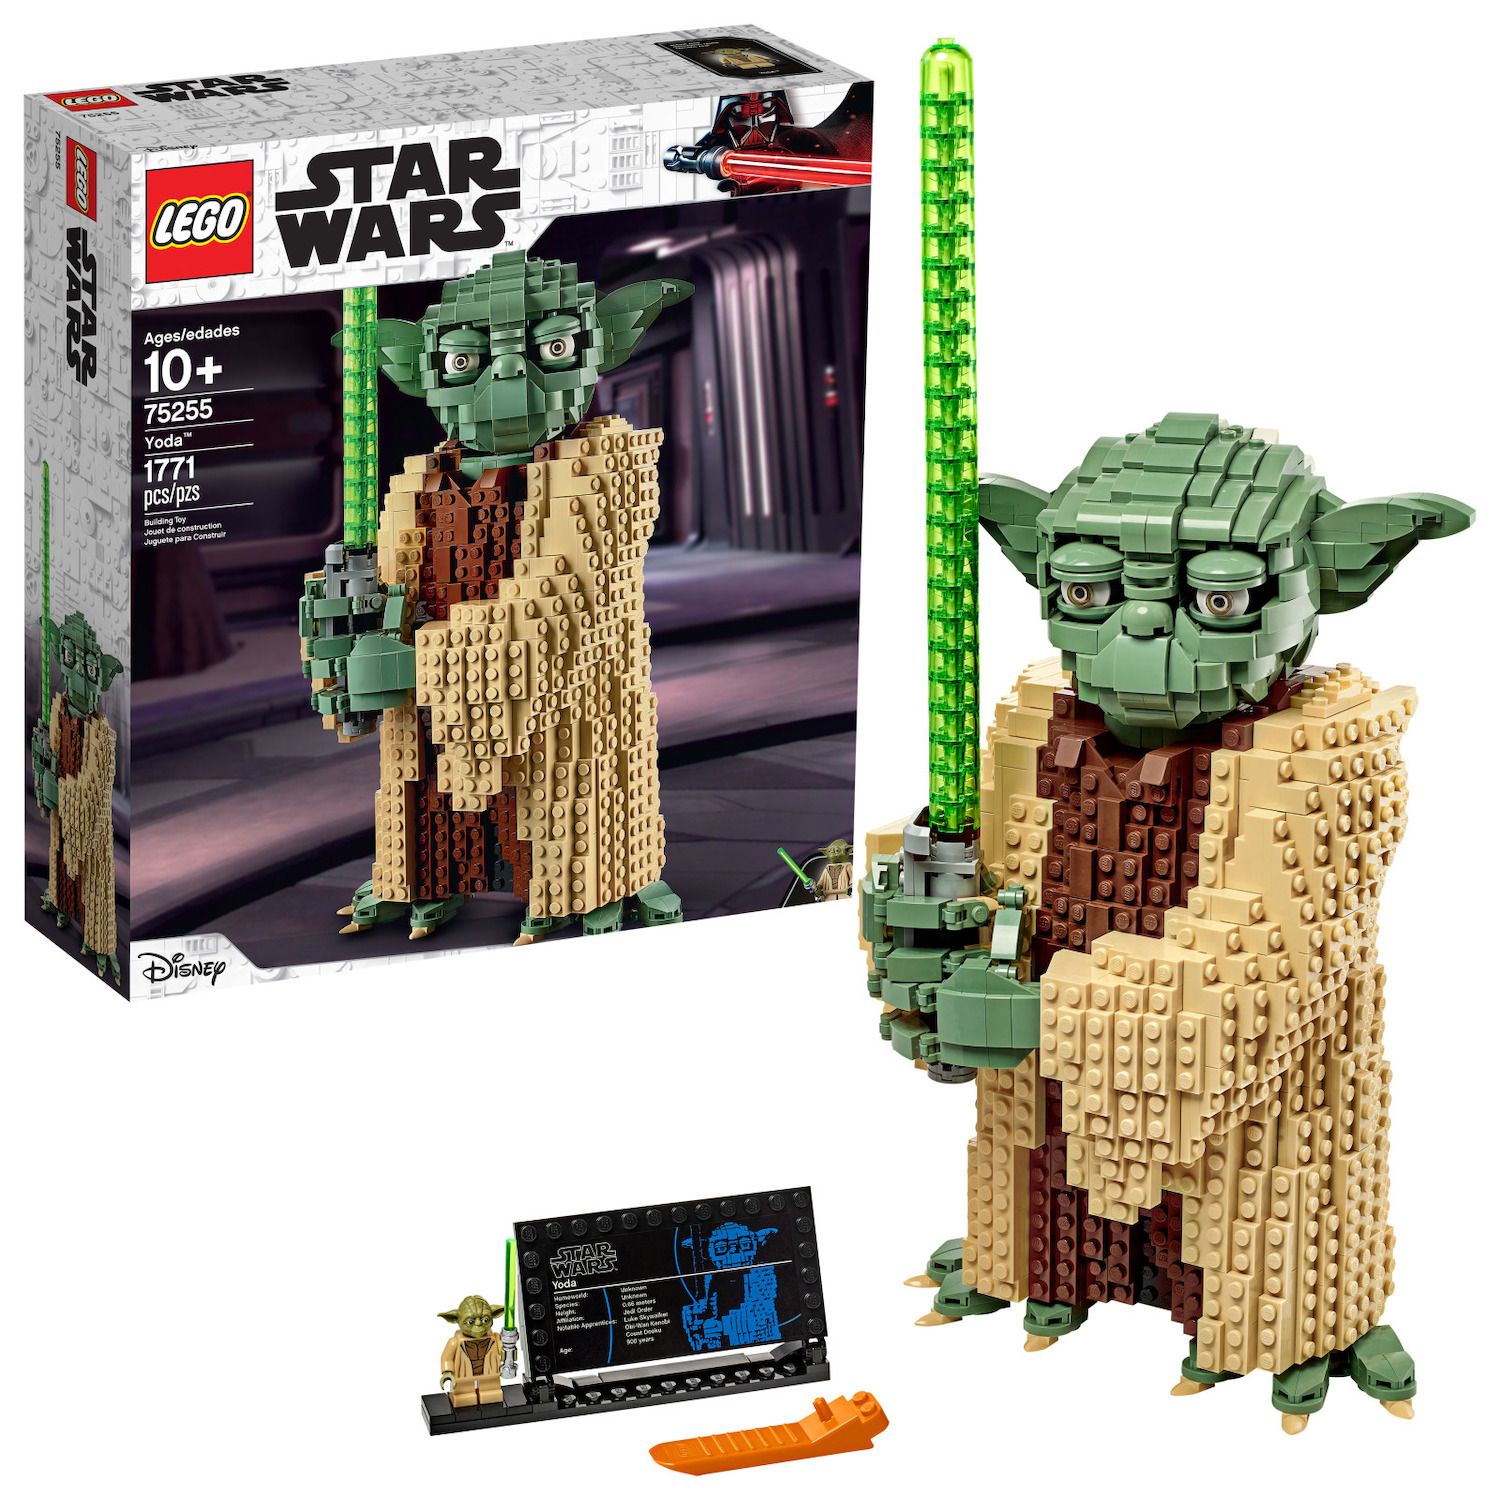 Image for LEGO Star Wars Yoda 75255 Toy at Kohl's.